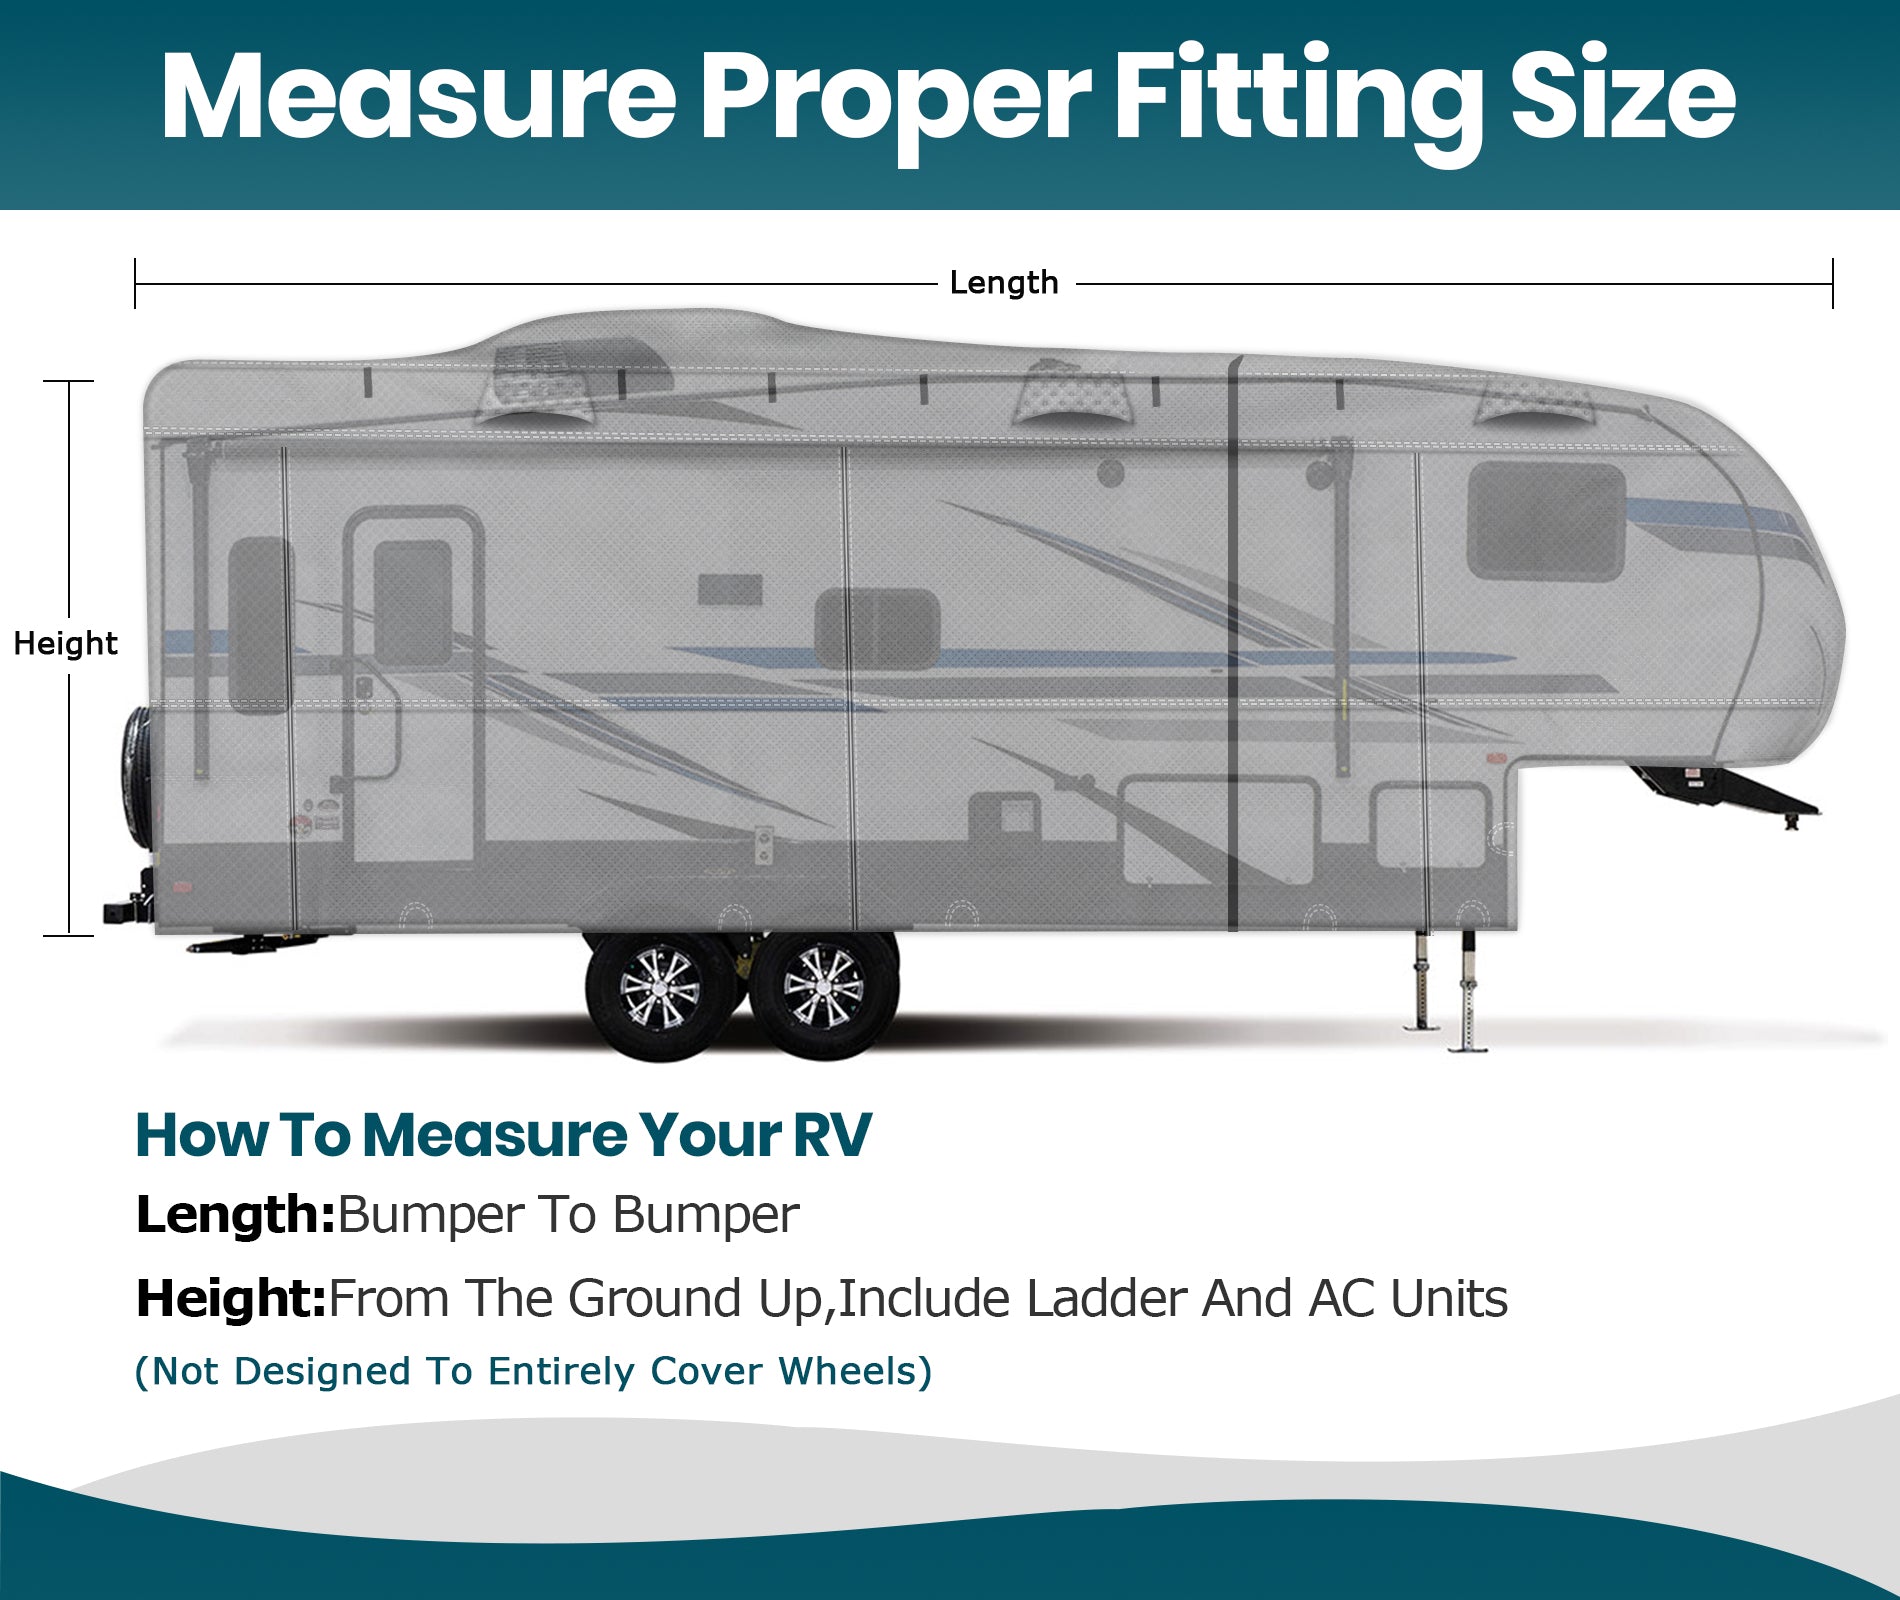 how to measure your rv covers | RV Covers | 5th Fifth Wheel Camper Covers 7 Layers Winter Waterproof